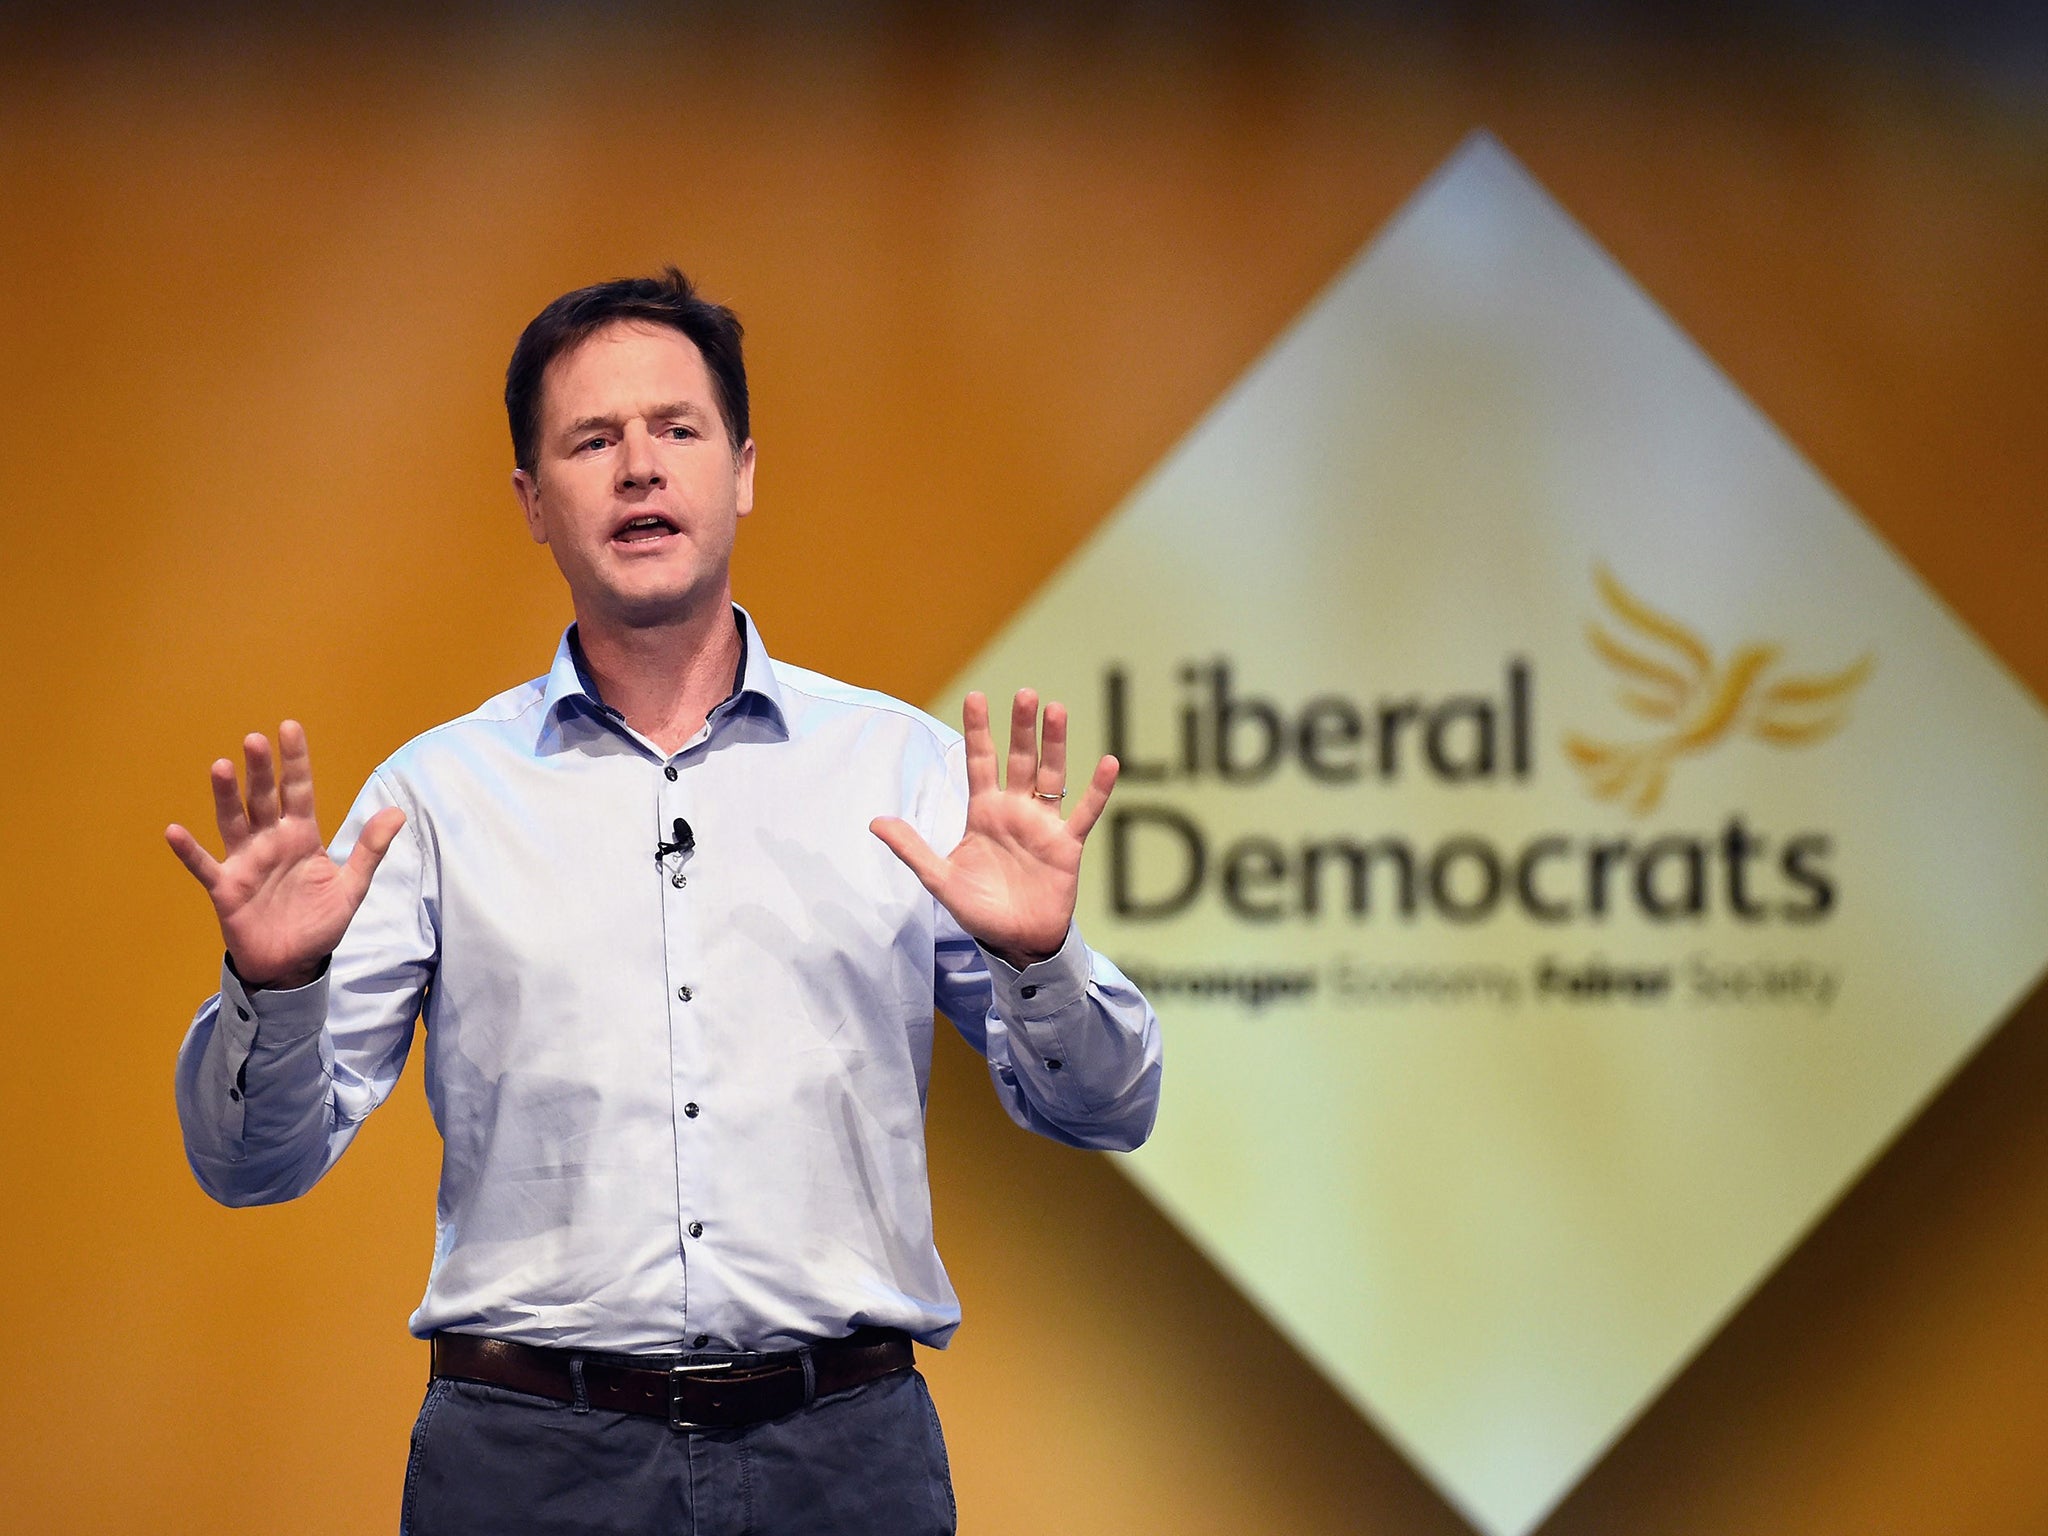 Liberal Democrat leader Nick Clegg at the annual party conference